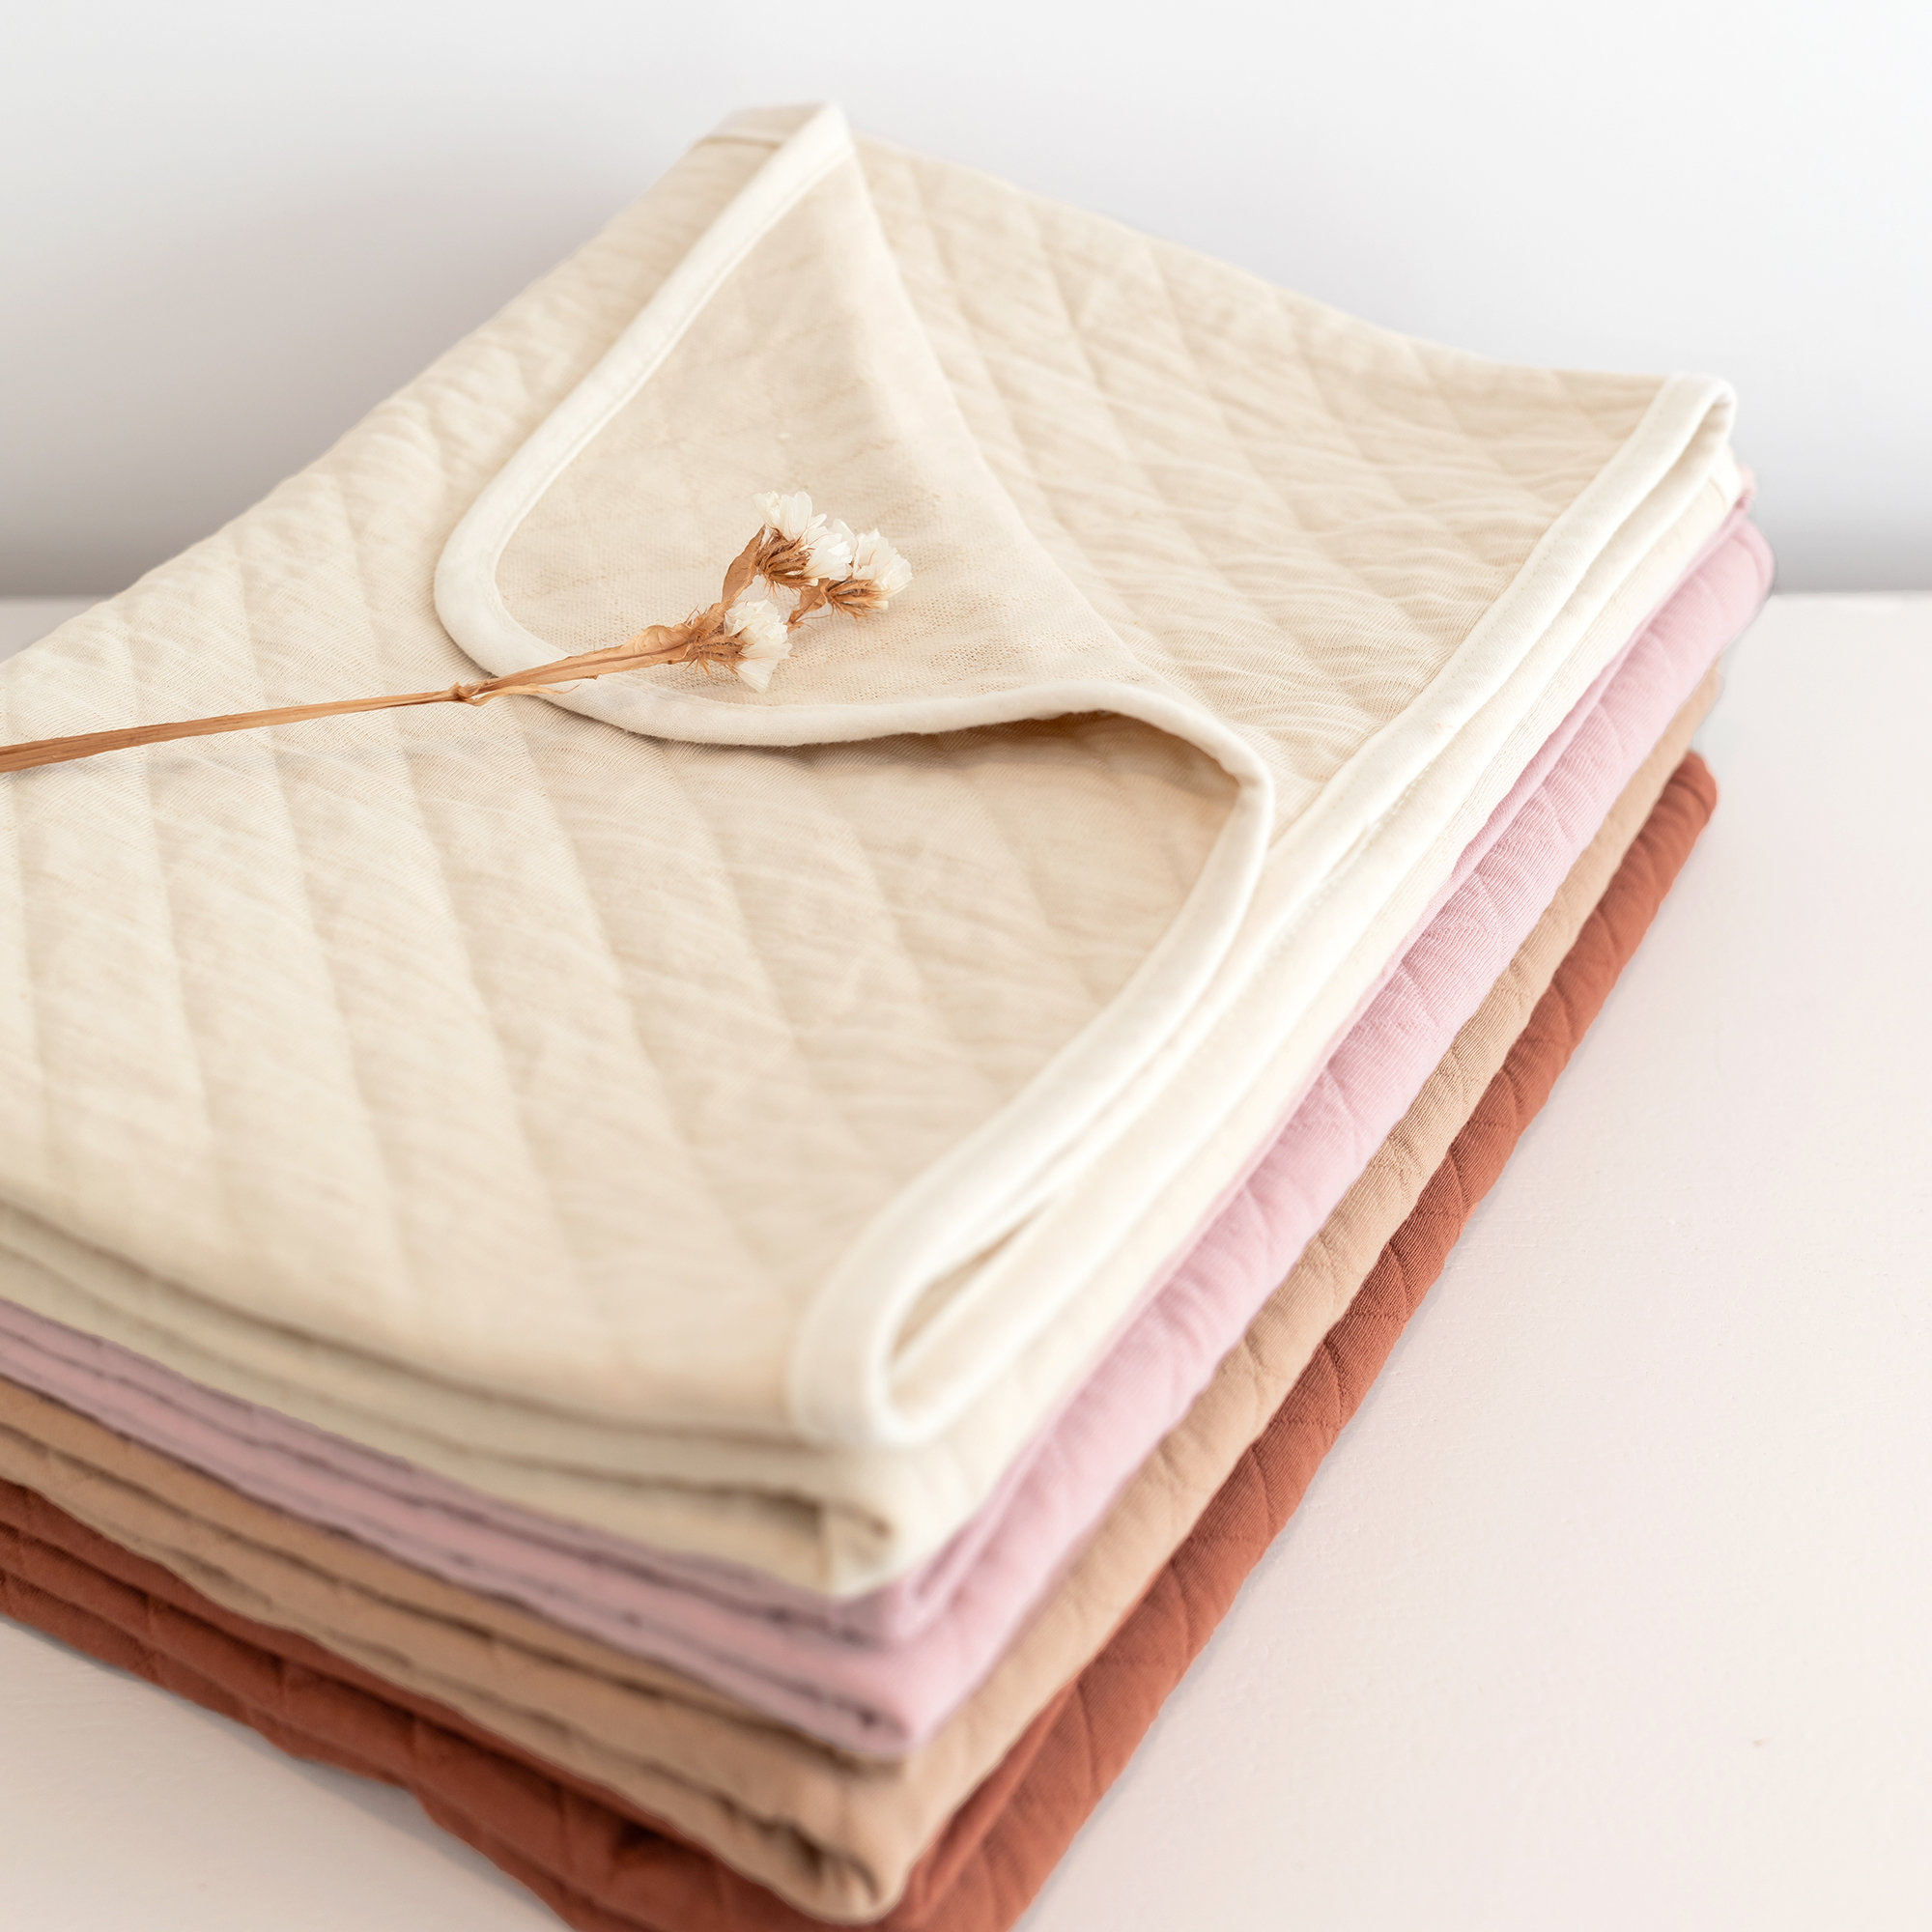 Manta Pady quilted jersey 75x100cm QUILT Cream tog 1.5[BEDDING]